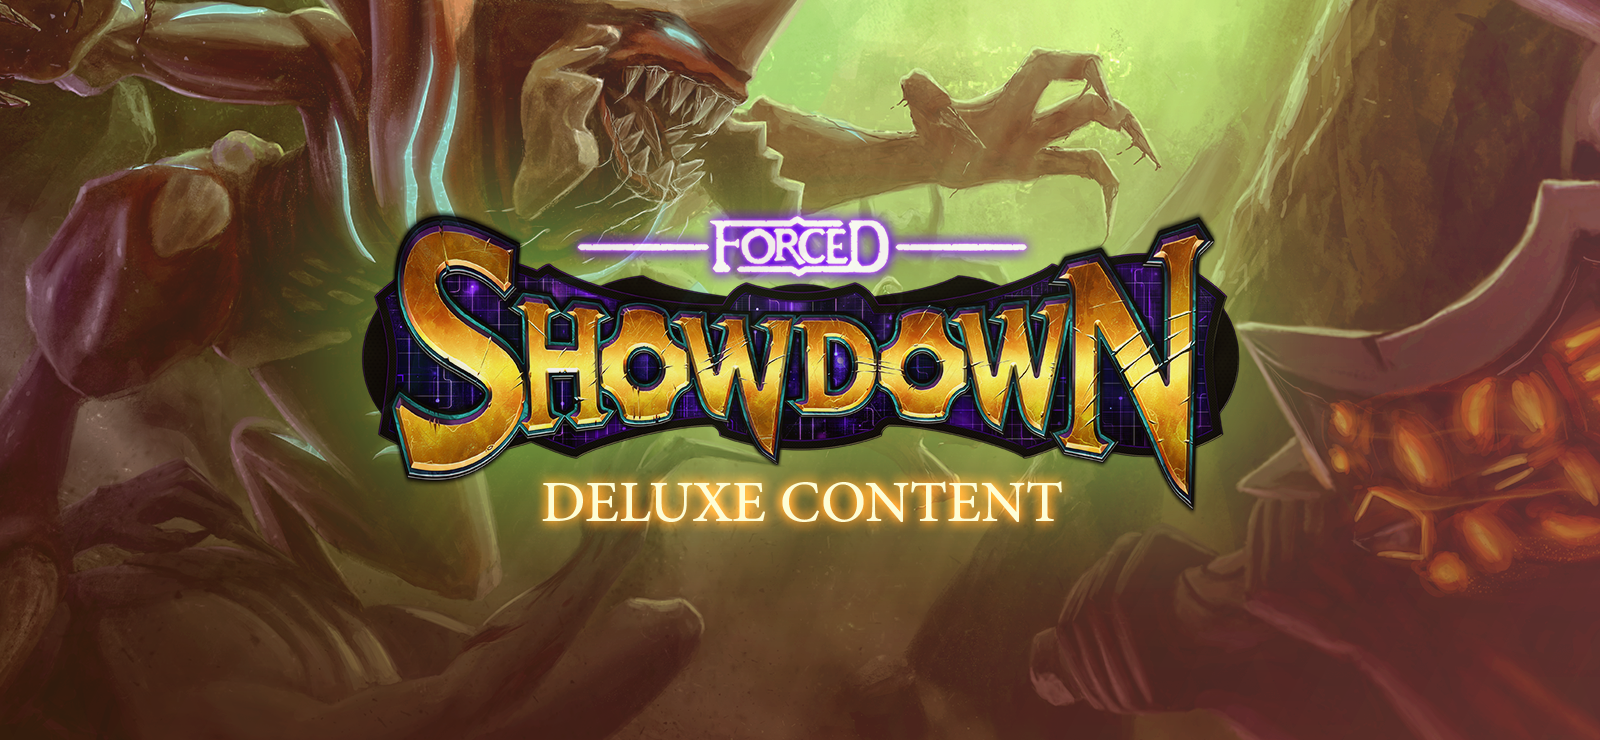 FORCED SHOWDOWN: Deluxe Content